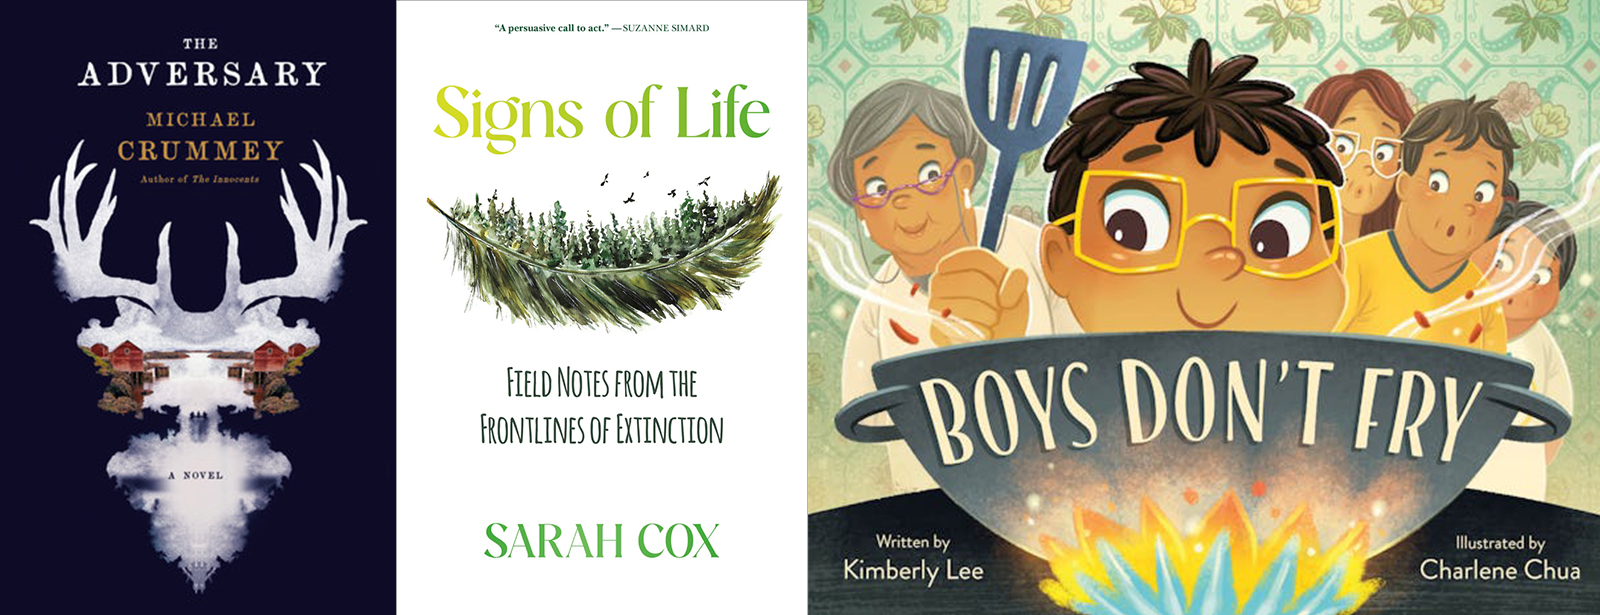 Three book covers, from left: 'The Adversary' by Michael Crummey; 'Signs of Life' by Sarah Cox; 'Boys Don't Fry' by Kimberly Lee.